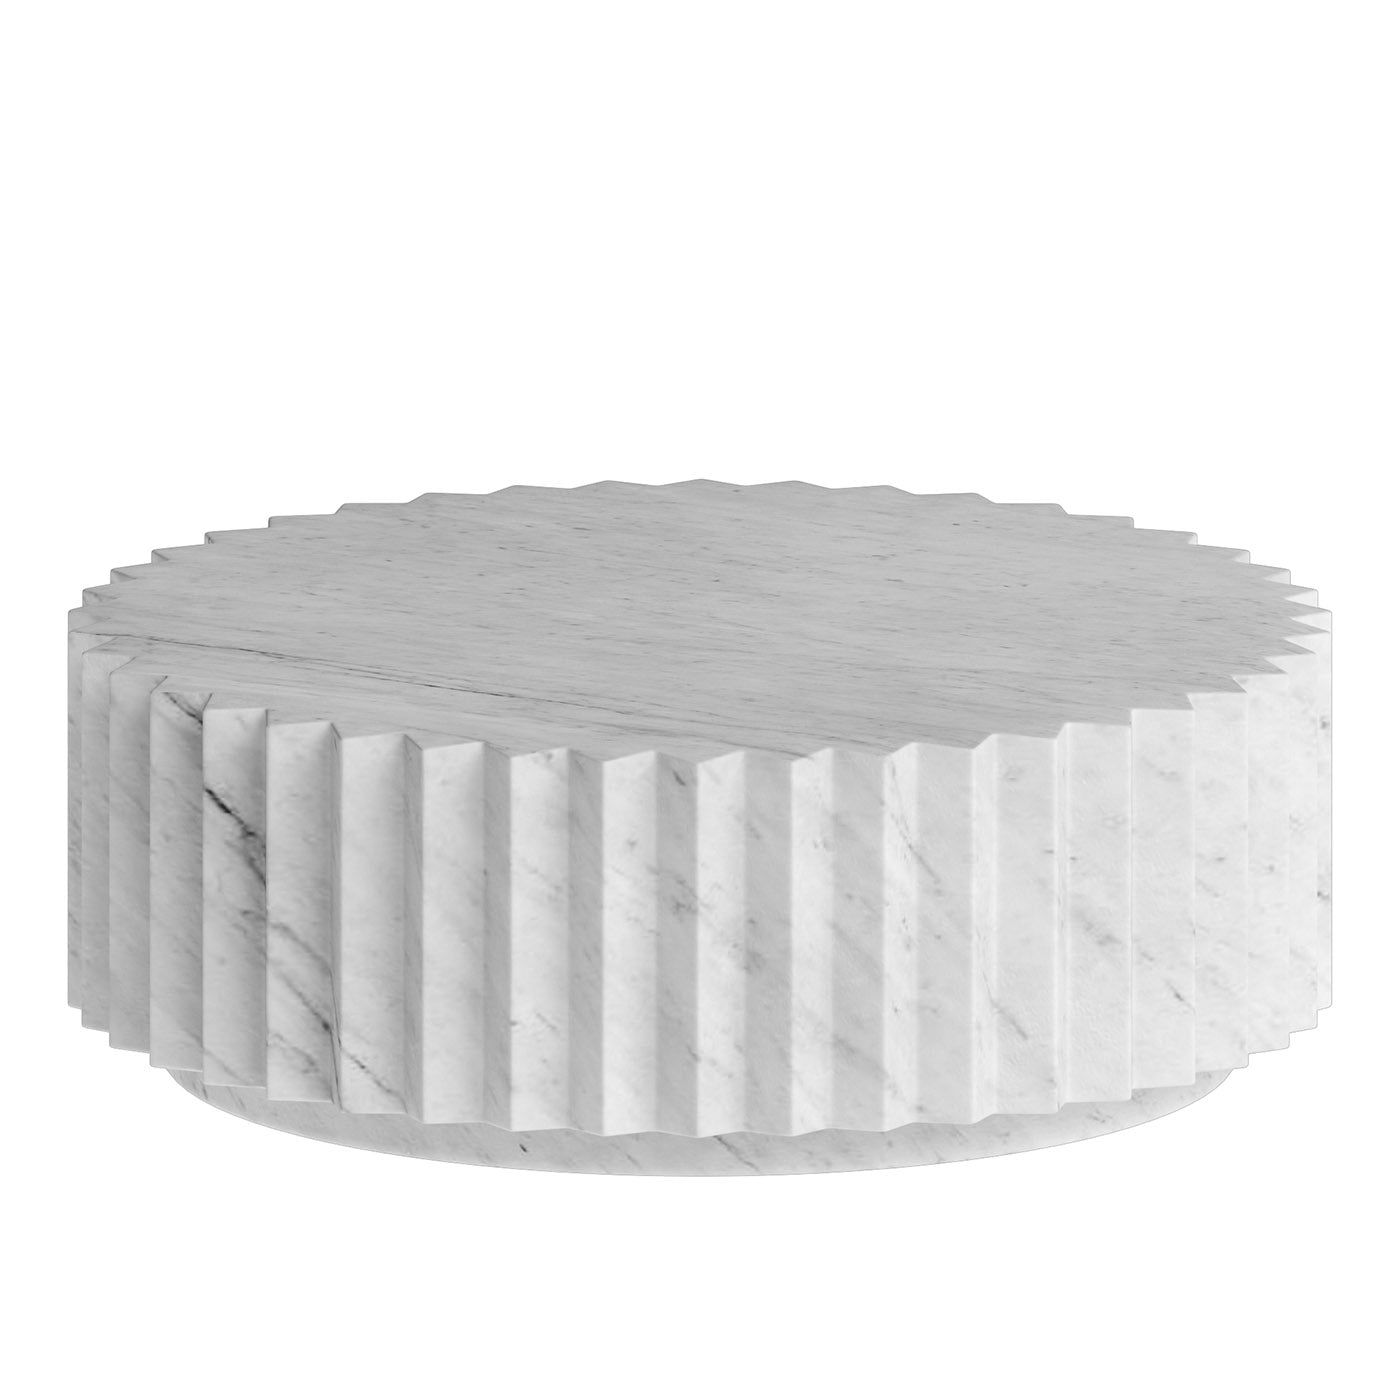 Doris Multifaceted In White Carrara Marble Coffee Table  - Alternative view 1